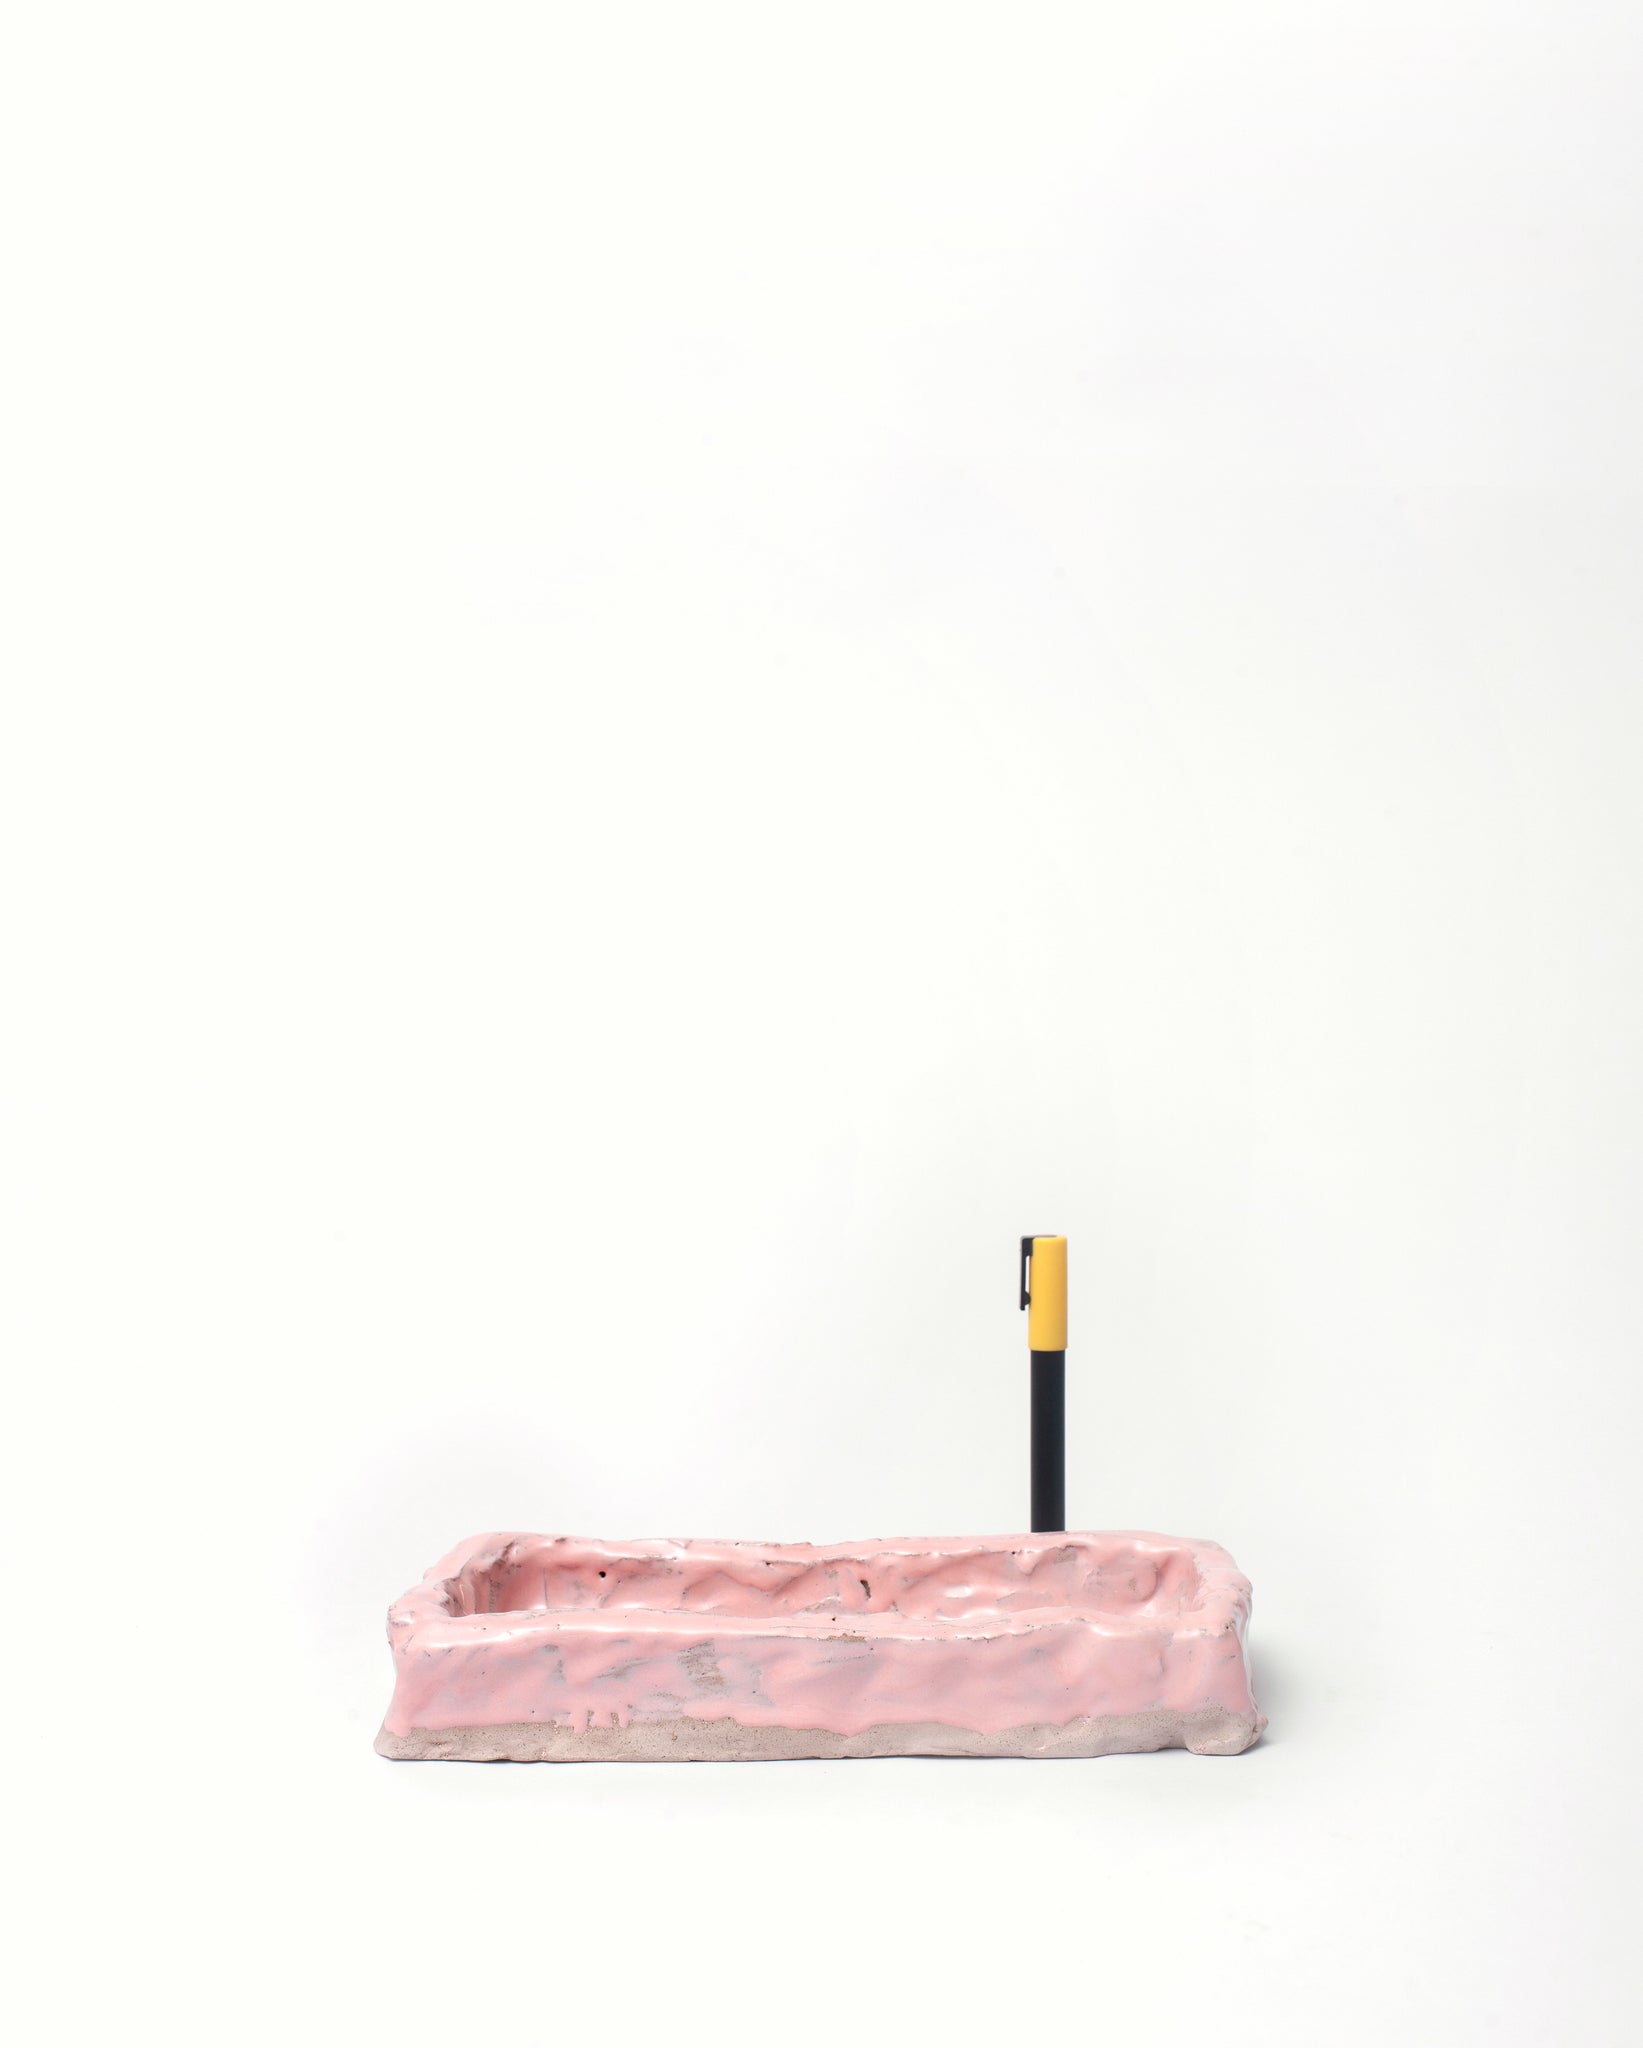 Handmade ceramic organizer object in pink with pen in the right corner white background